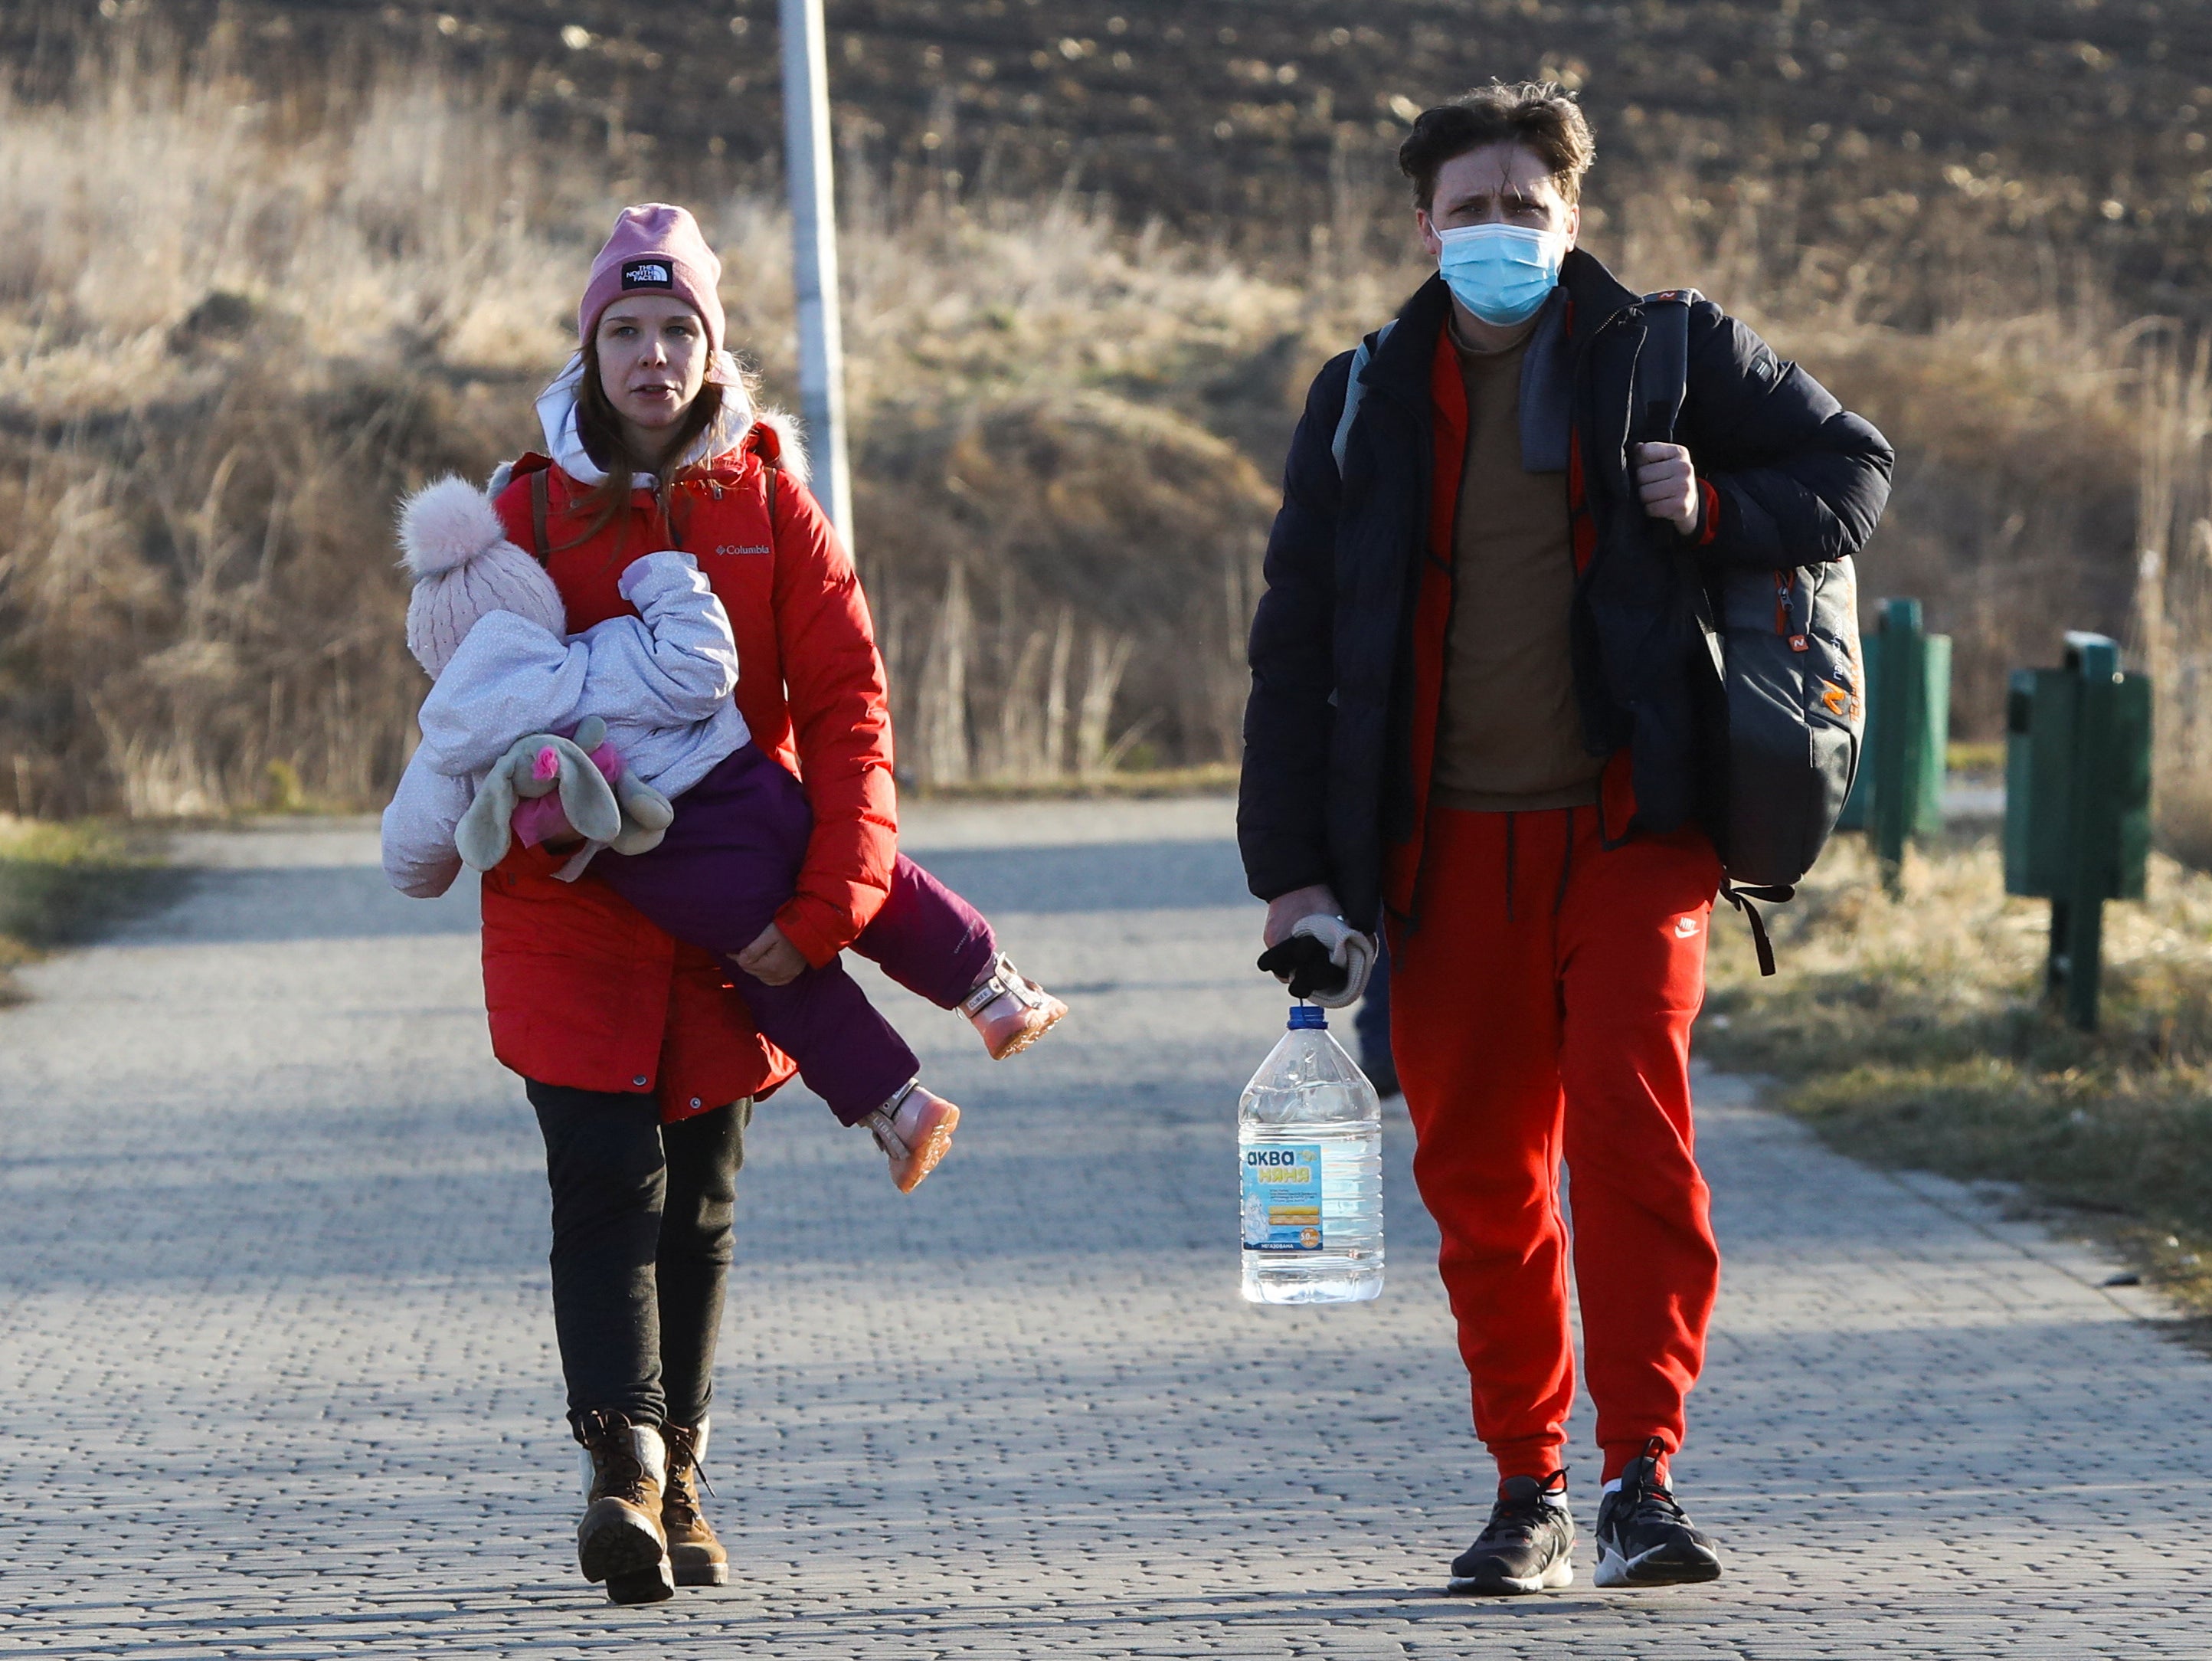 Hundreds of thousands of people fleeing the Russian invasion of Ukraine have poured into central Europe